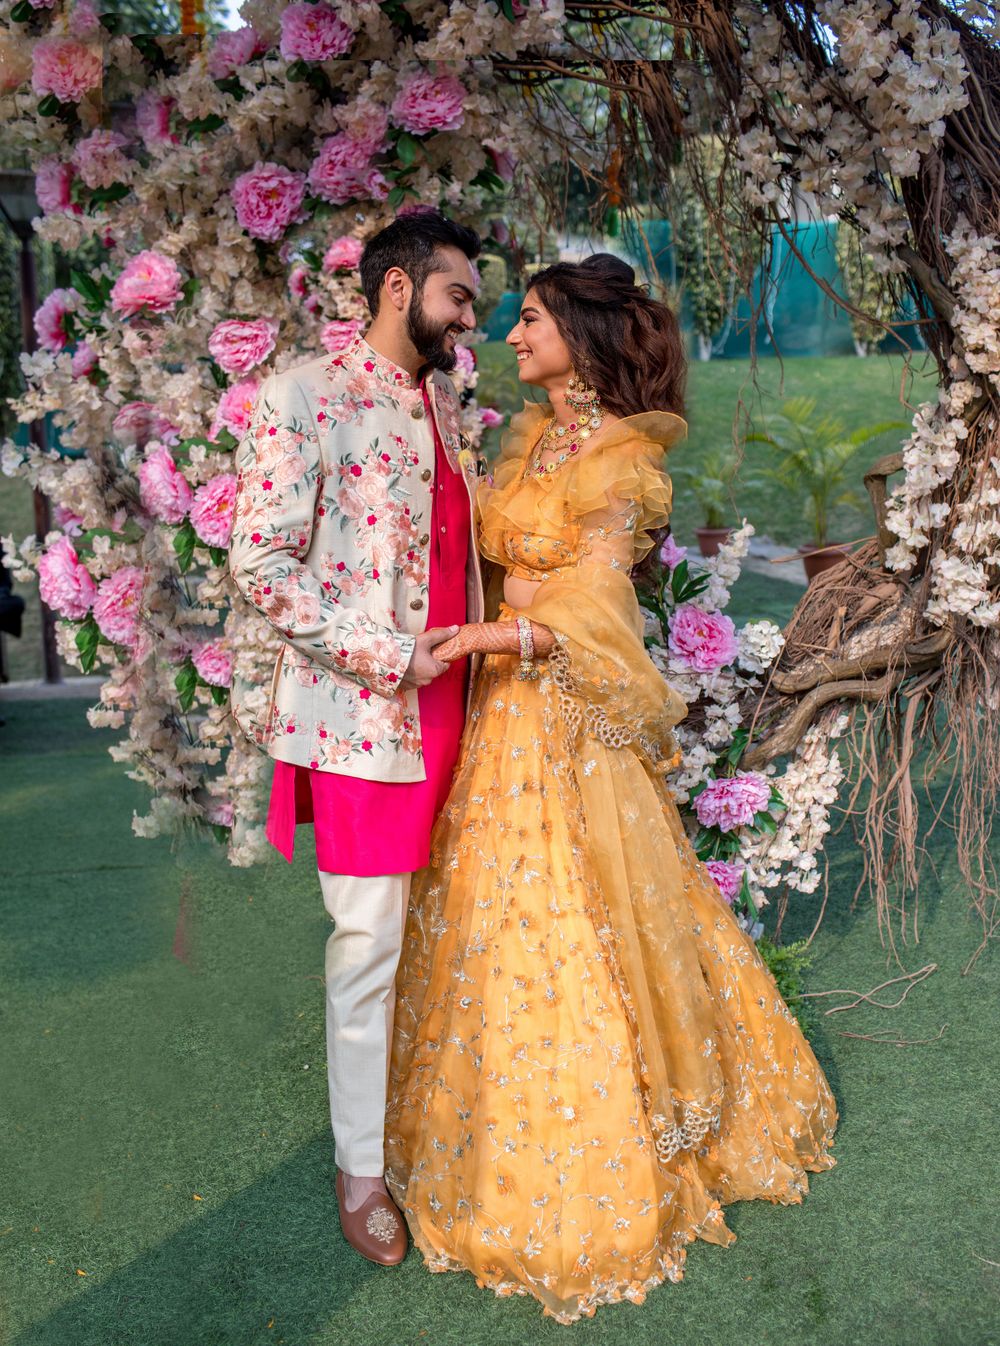 Photo of Mehendi couple portrait with groom in bright outfit and bride in yellow lehenga